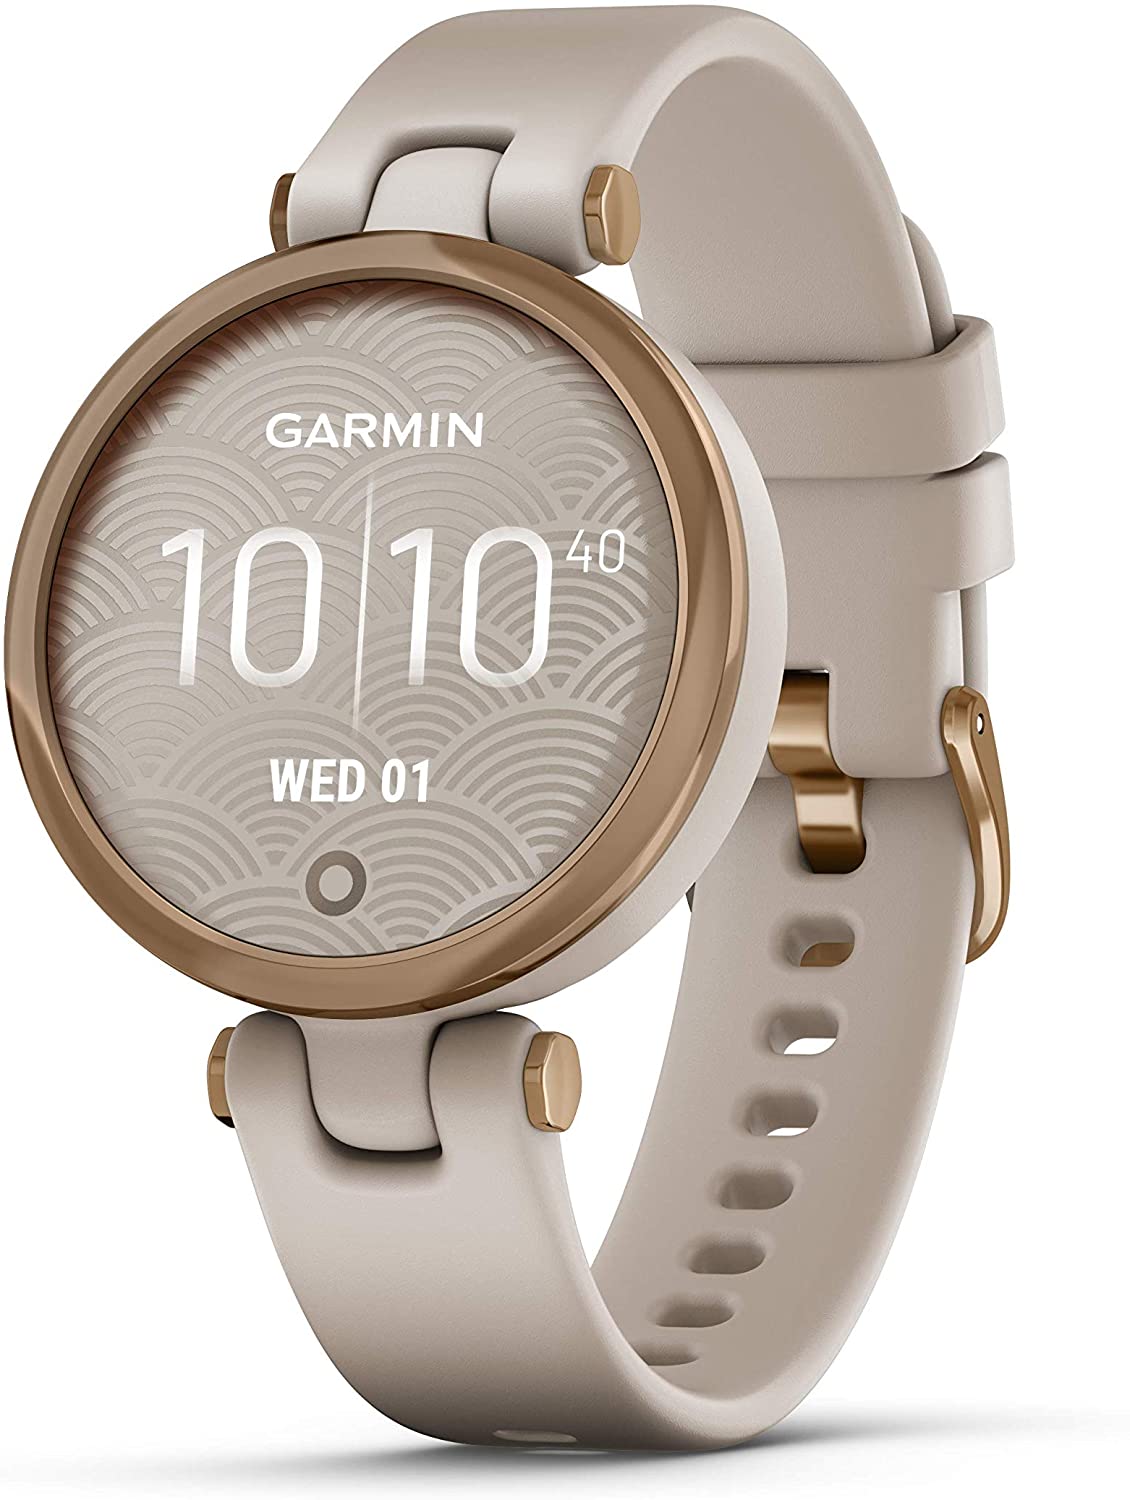 Garmin G010-N2384-01 Lily Sport Edition Rose Gold Bezel with Light Sand Case and Silicone Band - Certified Refurbished